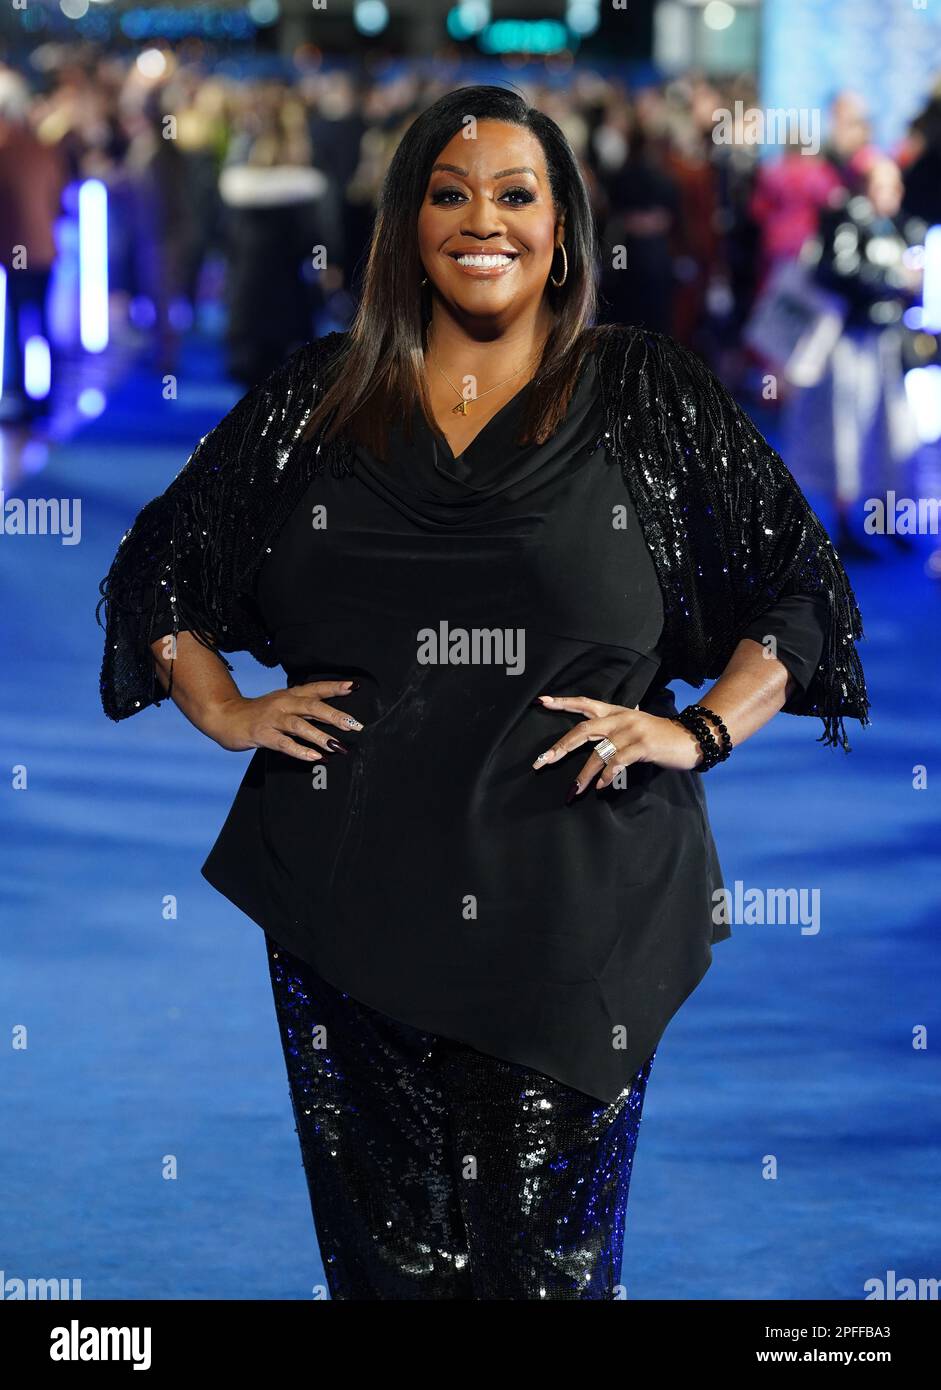 File photo dated 15/11/2022 of Alison Hammond who has confirmed she will become the new co-host of The Great British Bake Off. The actress and This Morning presenter will replace comedian Matt Lucas, who announced his departure last year. Issue date: Friday March 17, 2023. Stock Photo